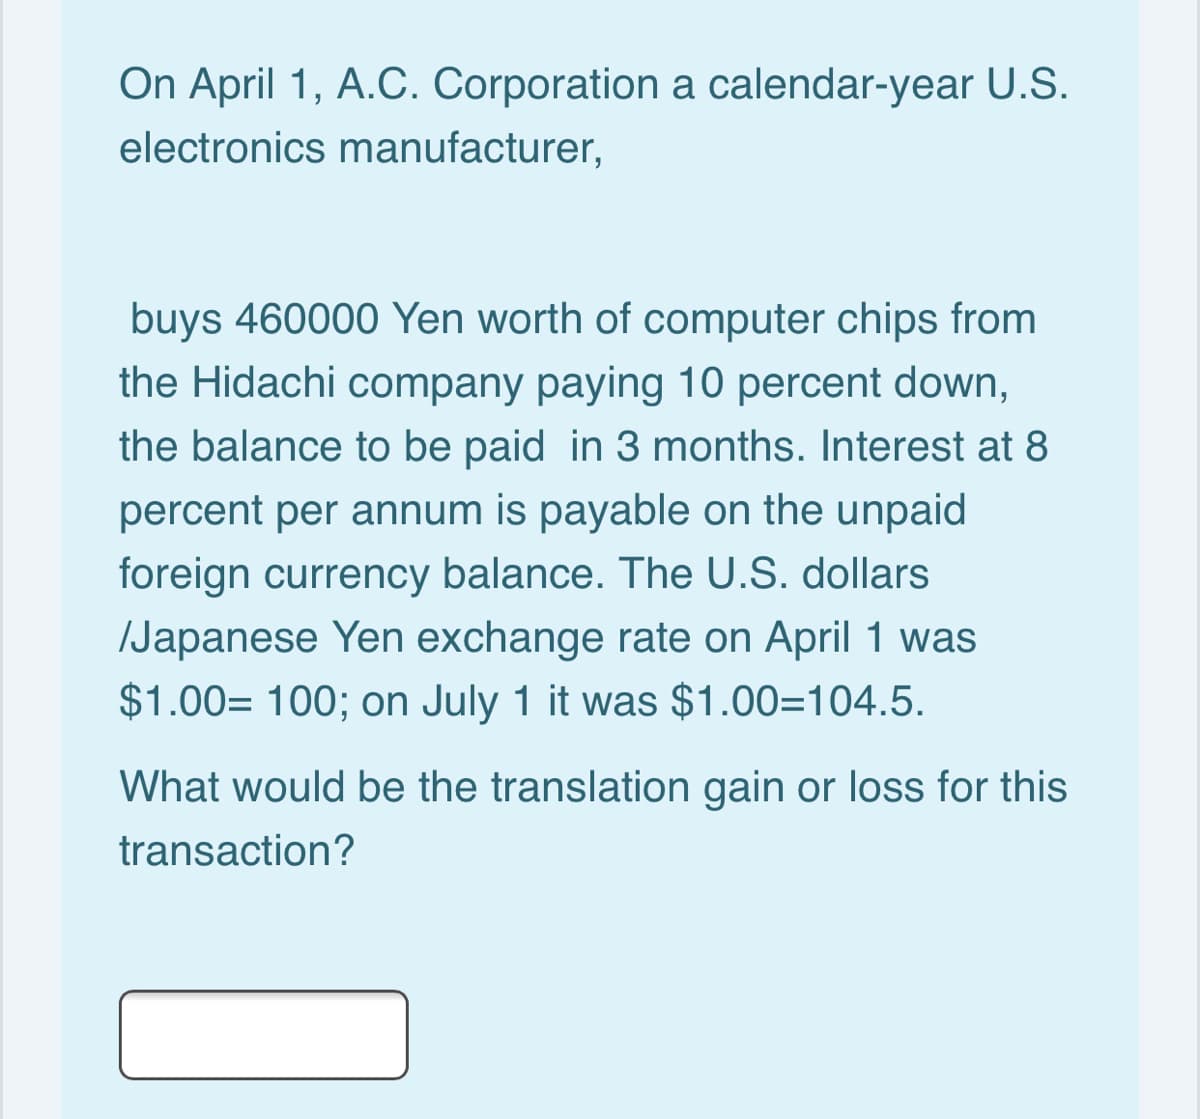 On April 1, A.C. Corporation a calendar-year U.S.
electronics manufacturer,
buys 460000 Yen worth of computer chips from
the Hidachi company paying 10 percent down,
the balance to be paid in 3 months. Interest at 8
percent per annum is payable on the unpaid
foreign currency balance. The U.S. dollars
/Japanese Yen exchange rate on April 1 was
$1.00= 100; on July 1 it was $1.00=104.5.
What would be the translation gain or loss for this
transaction?
